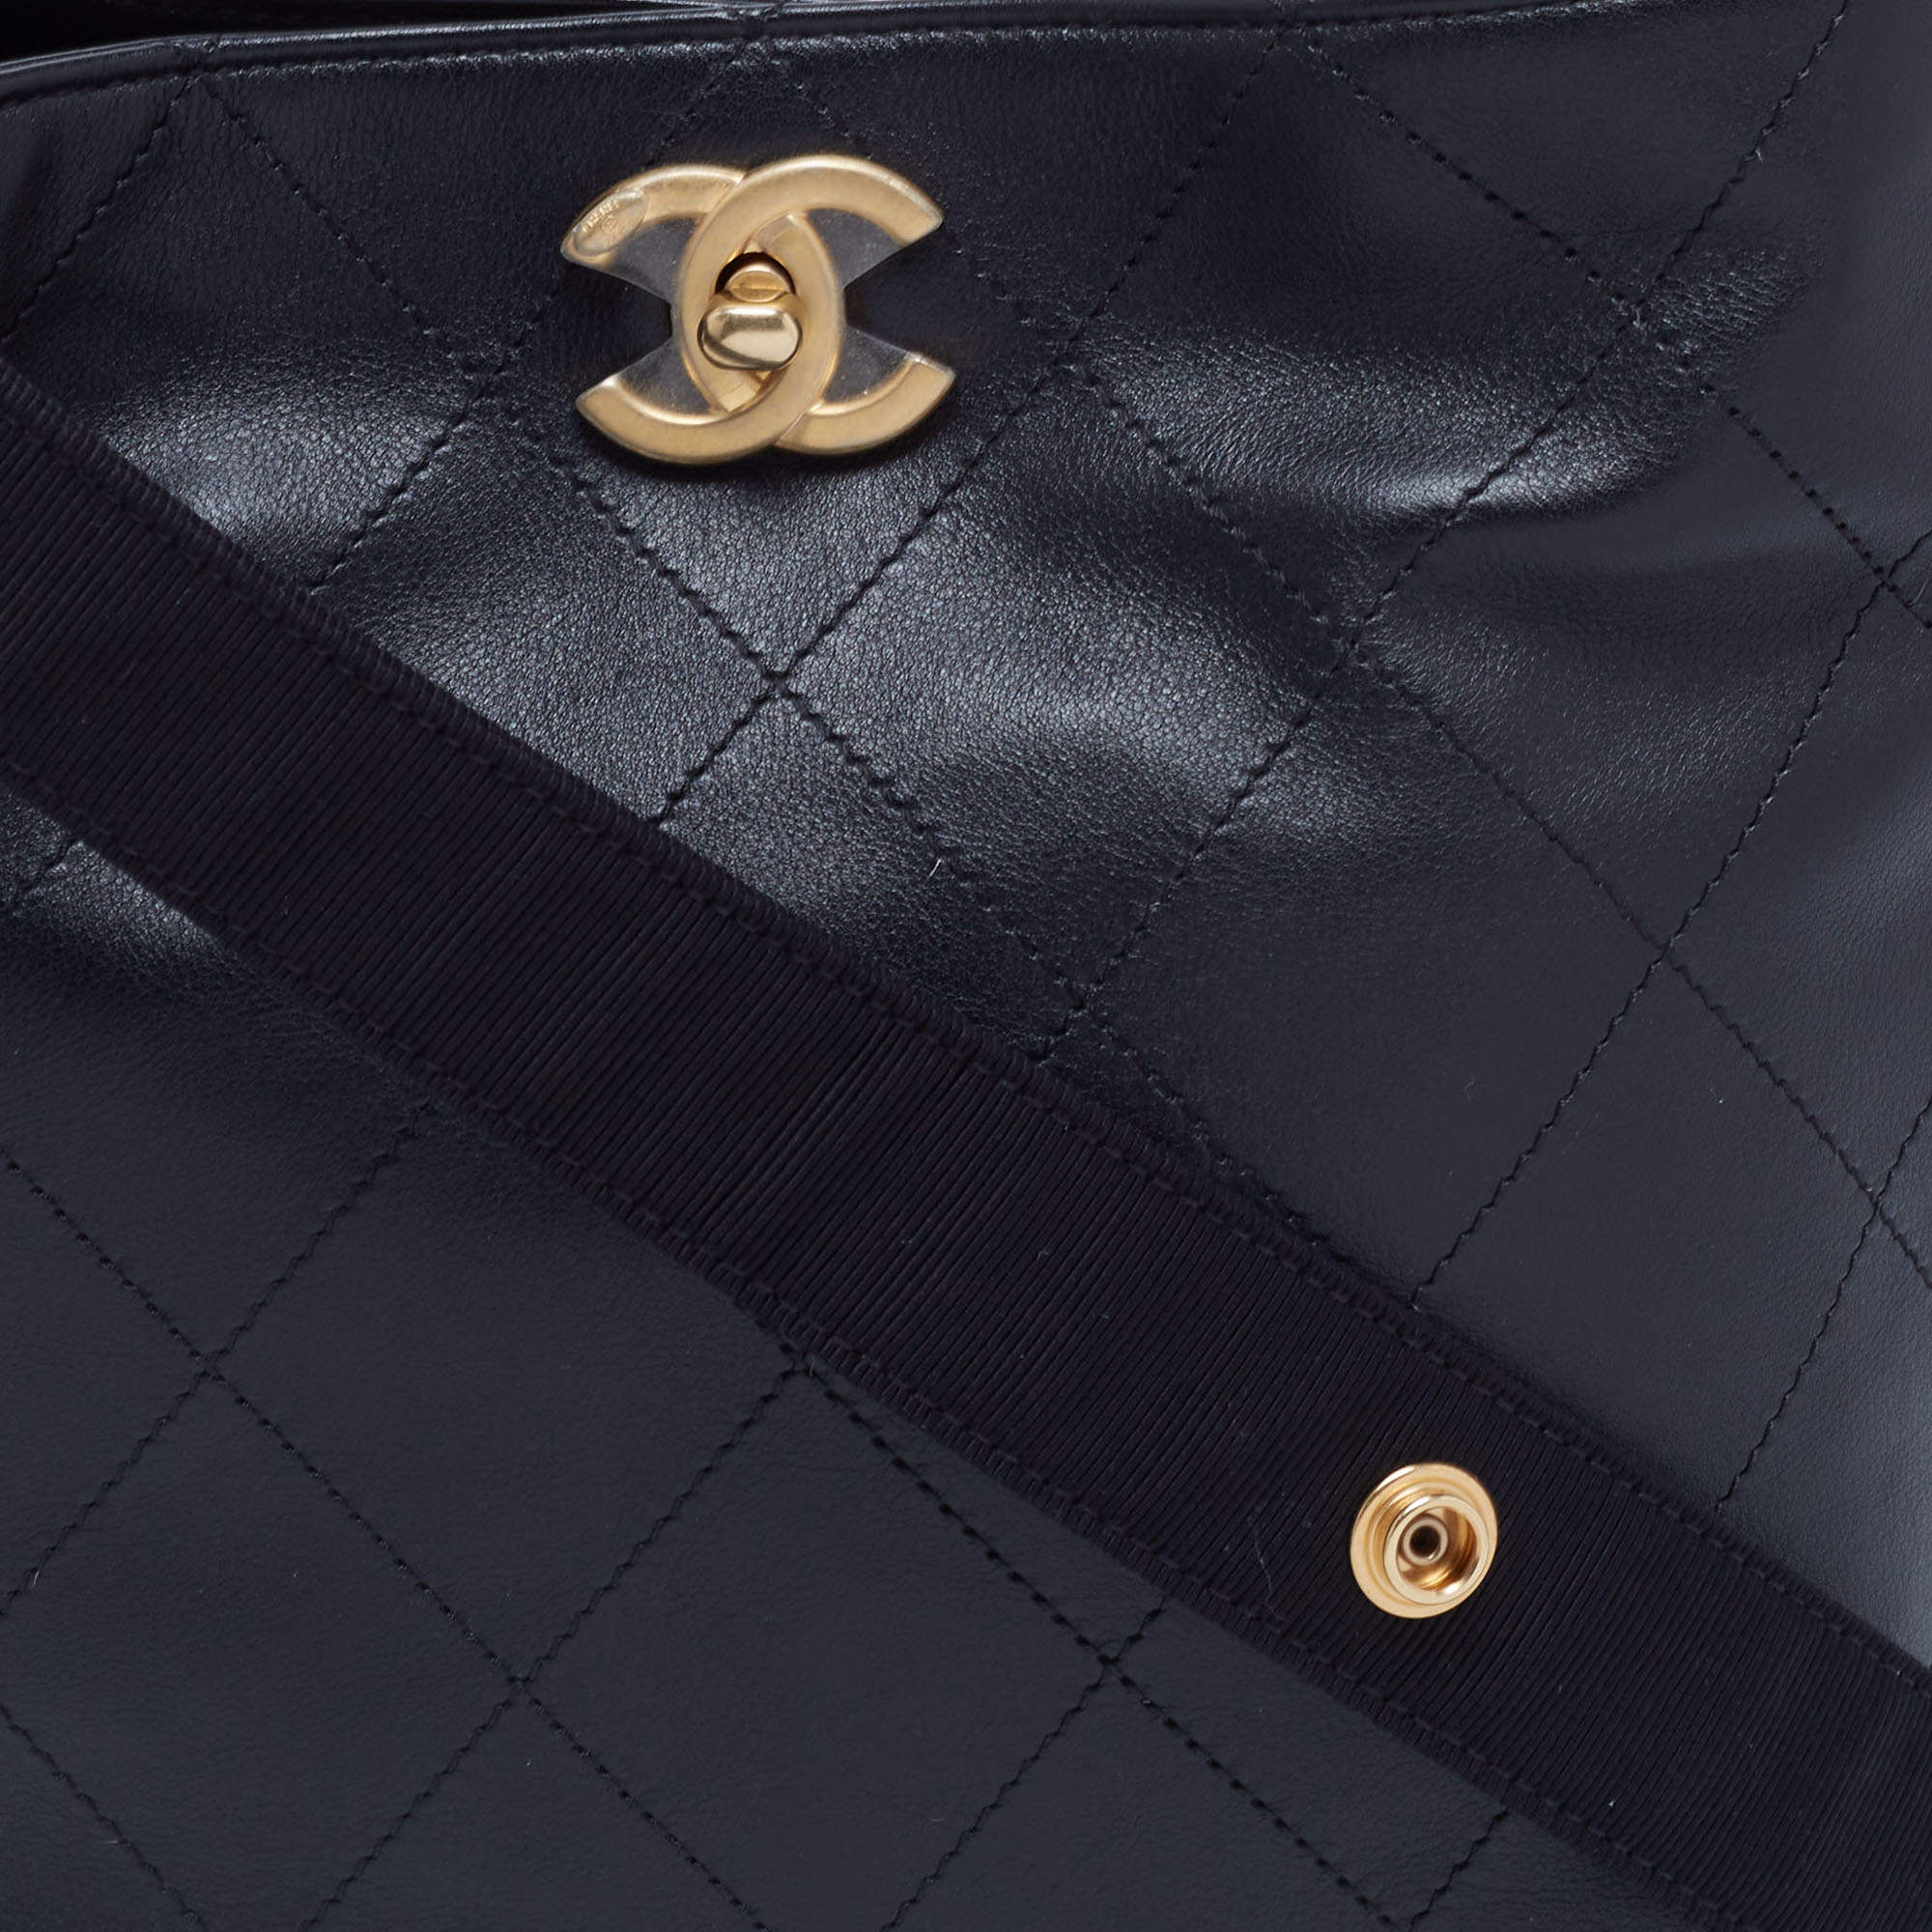 Chanel Black Quilt Stitched Leather Button Up Hobo